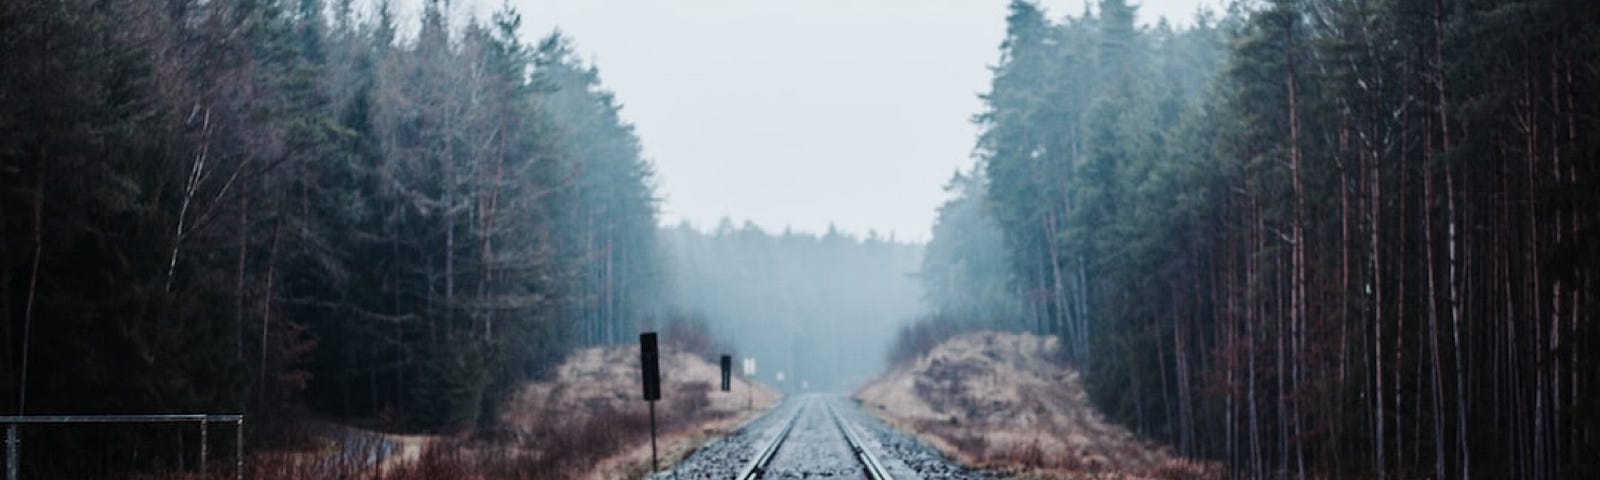 Railroad tracks disappear into the distance in a misty forest.